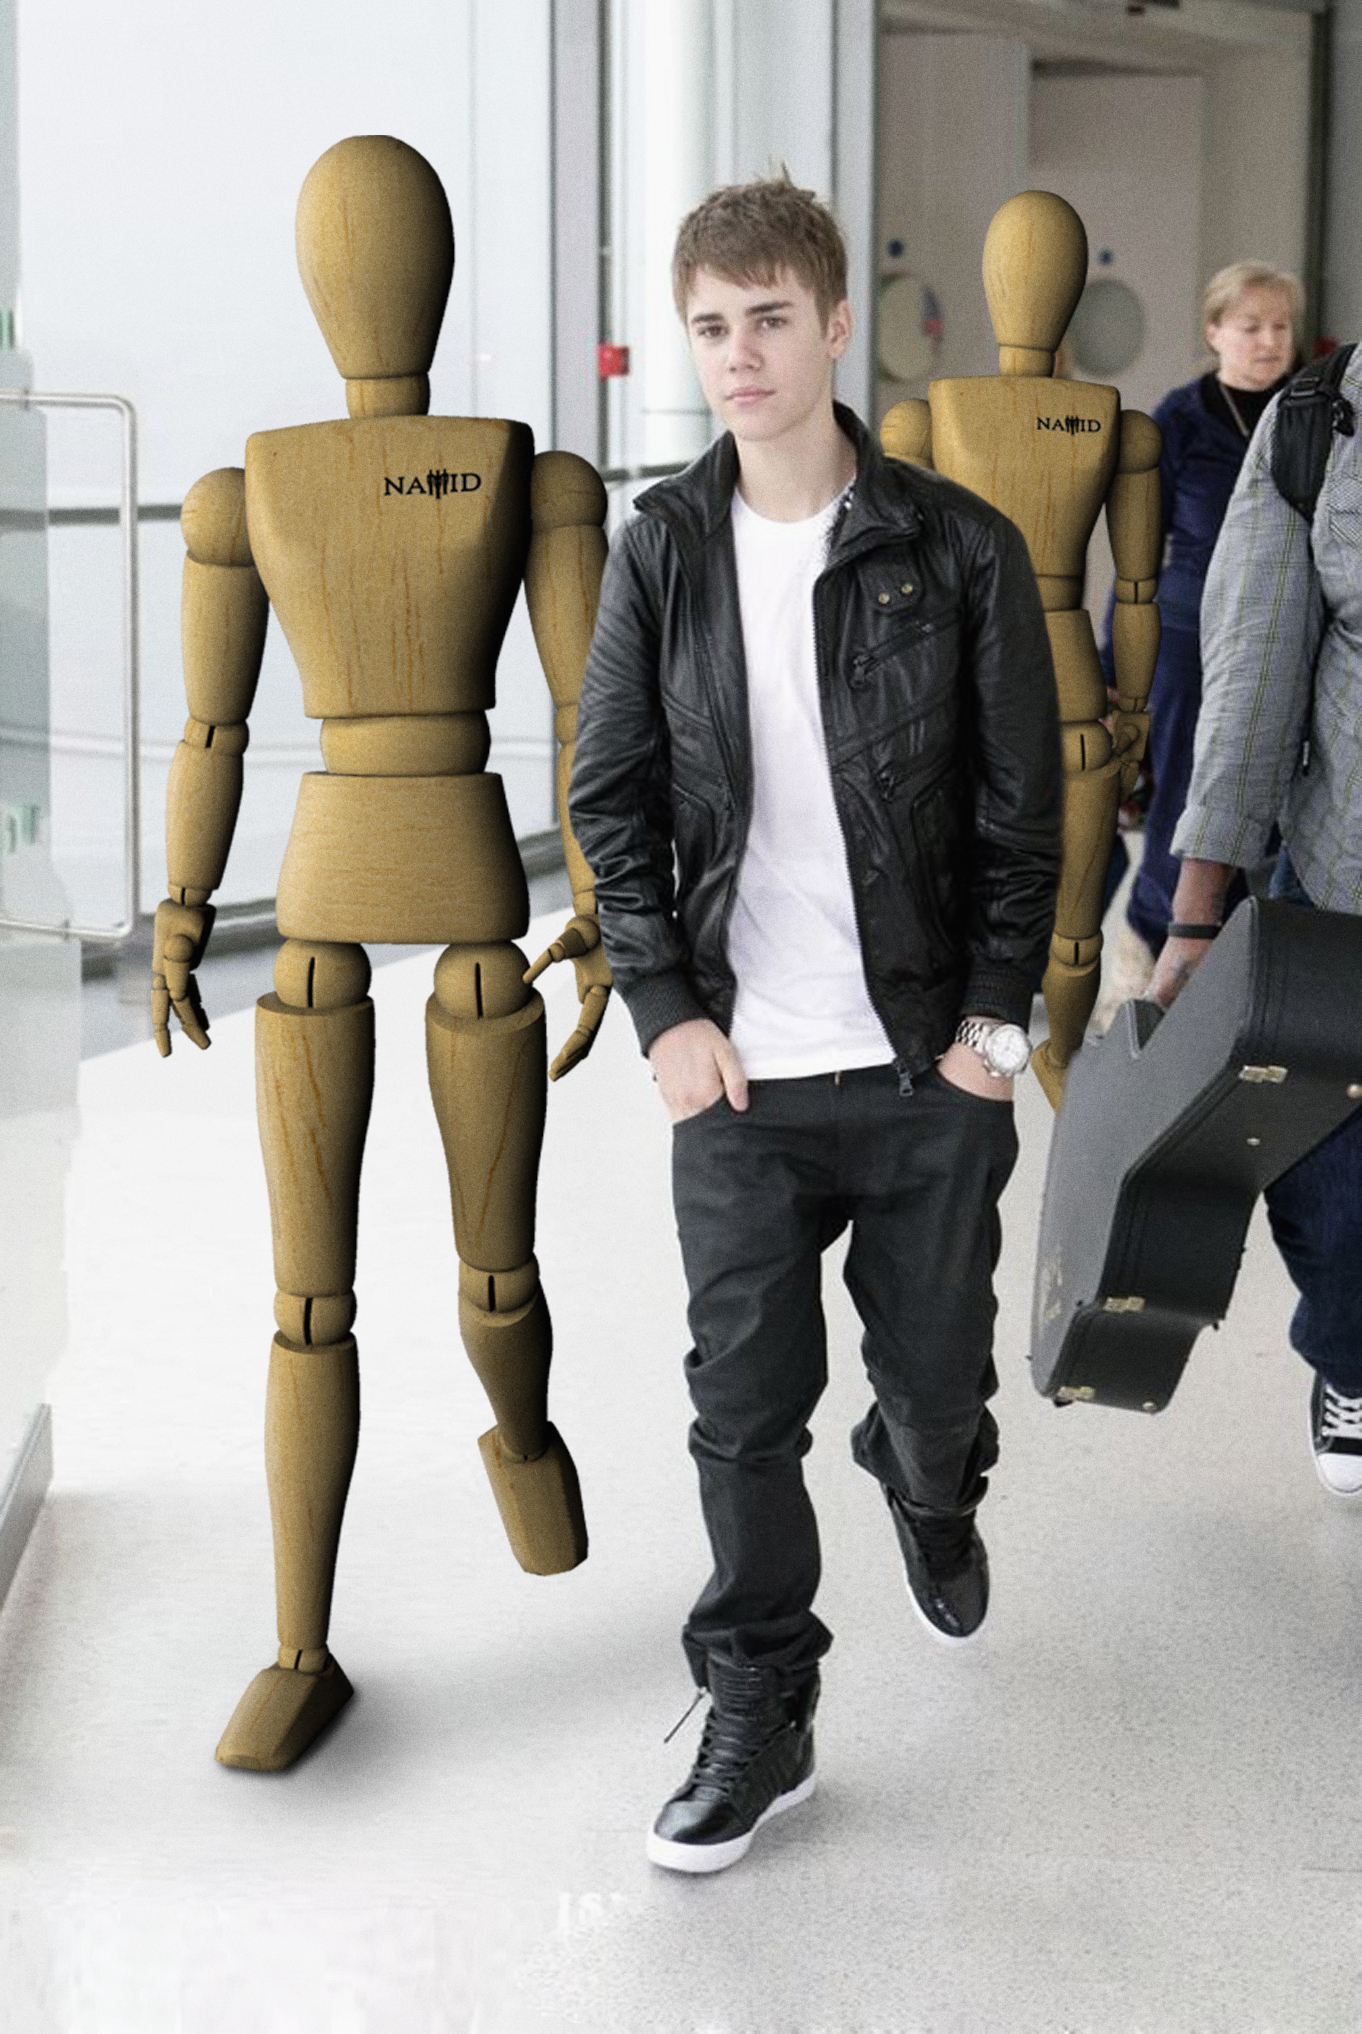 Namid with Justin Bieber